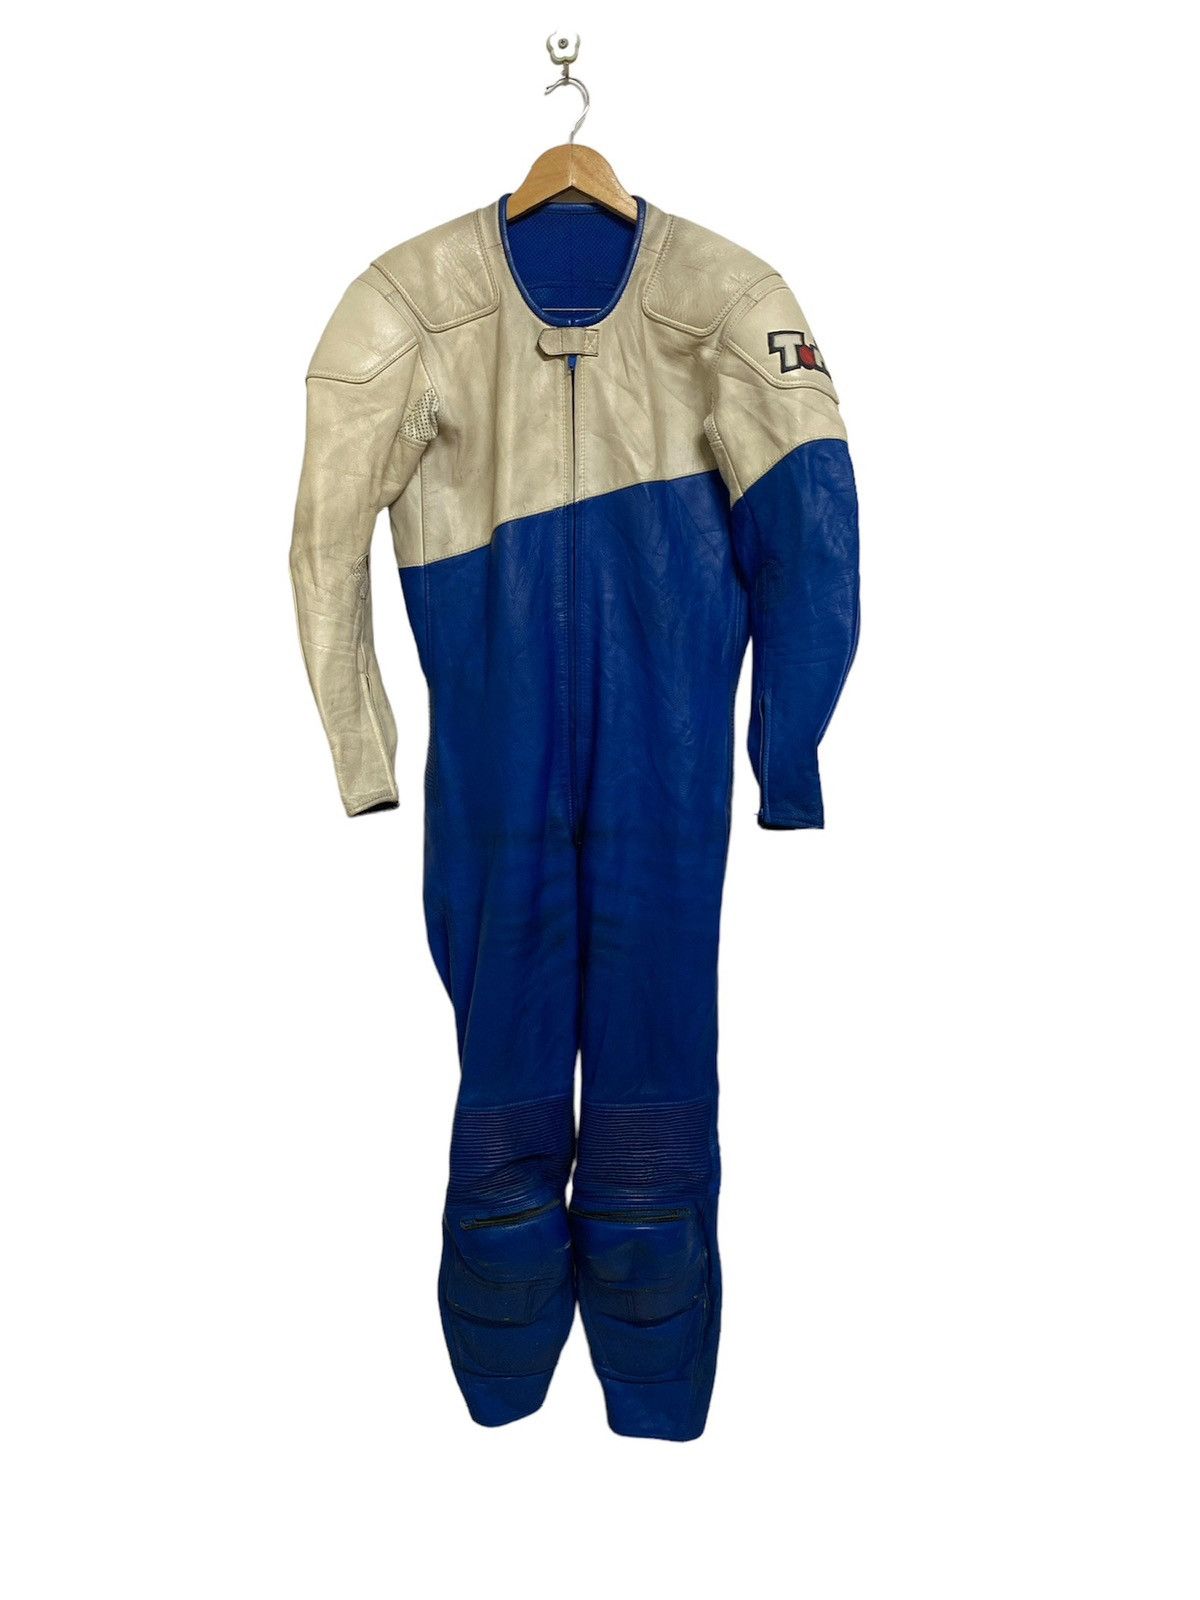 Sports Specialties - Vintage Japan Leather Racing Padded Suit Overall - 1